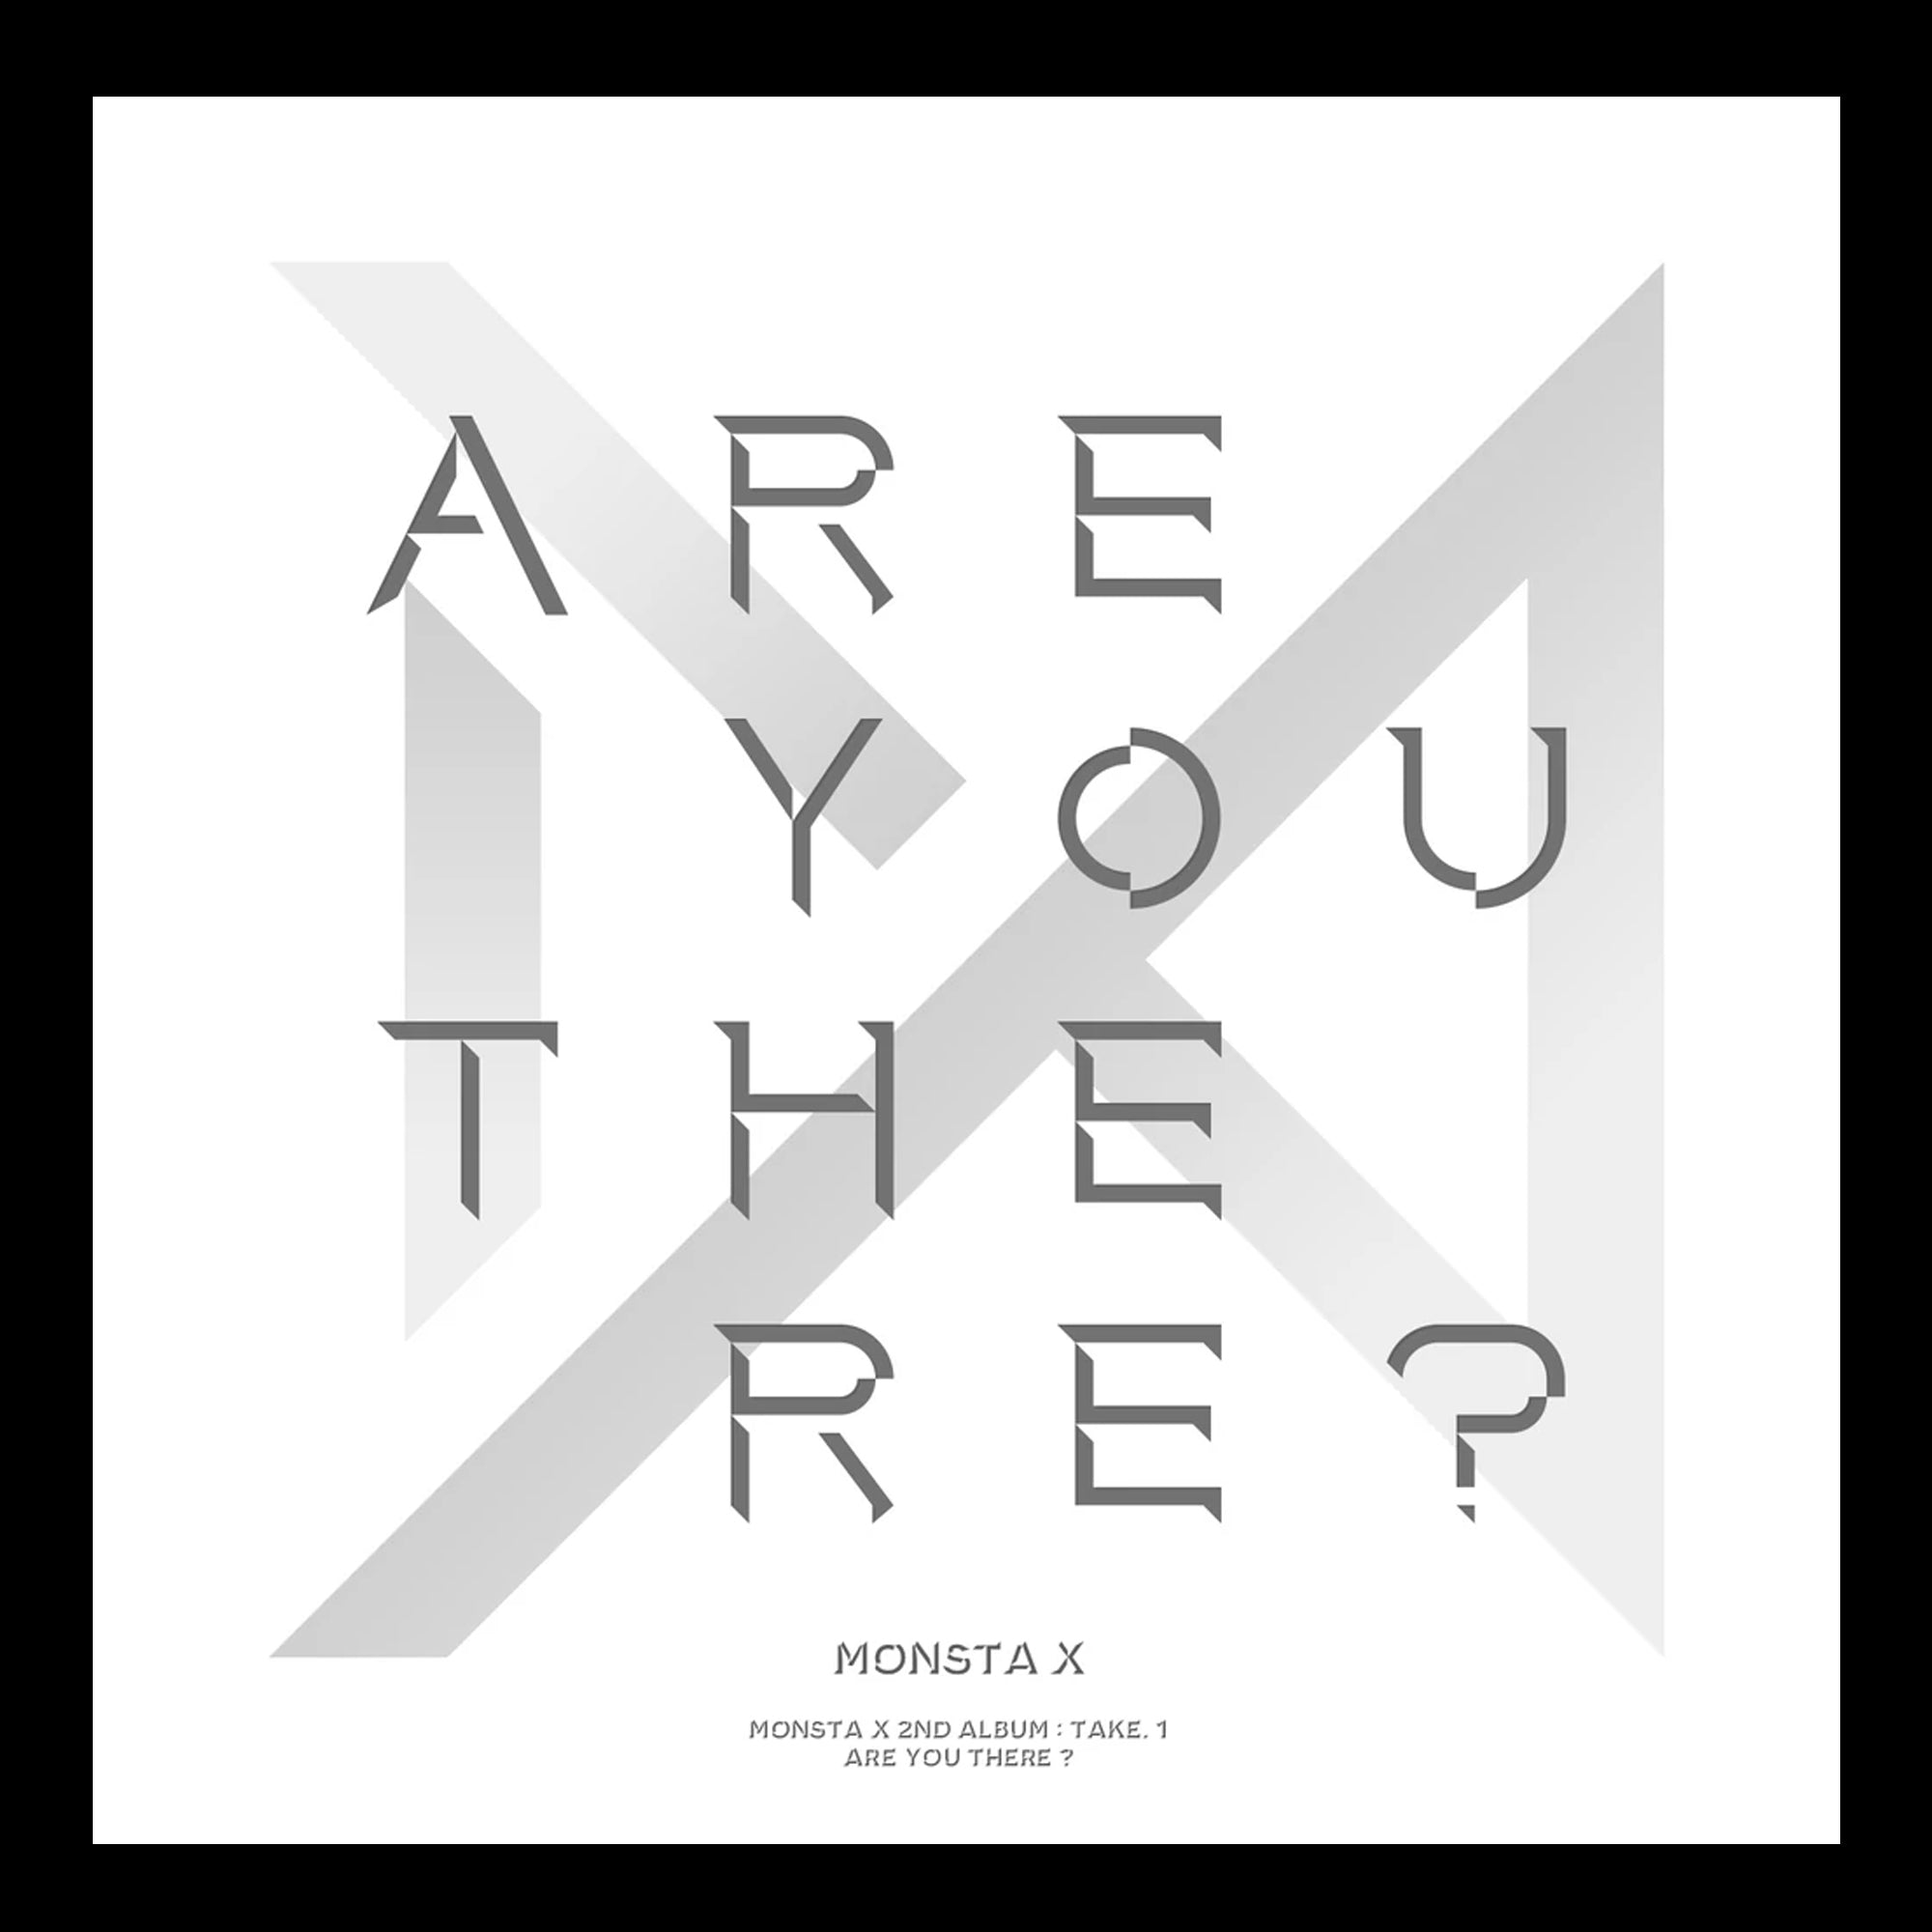 MONSTA X - ARE YOU THERE?